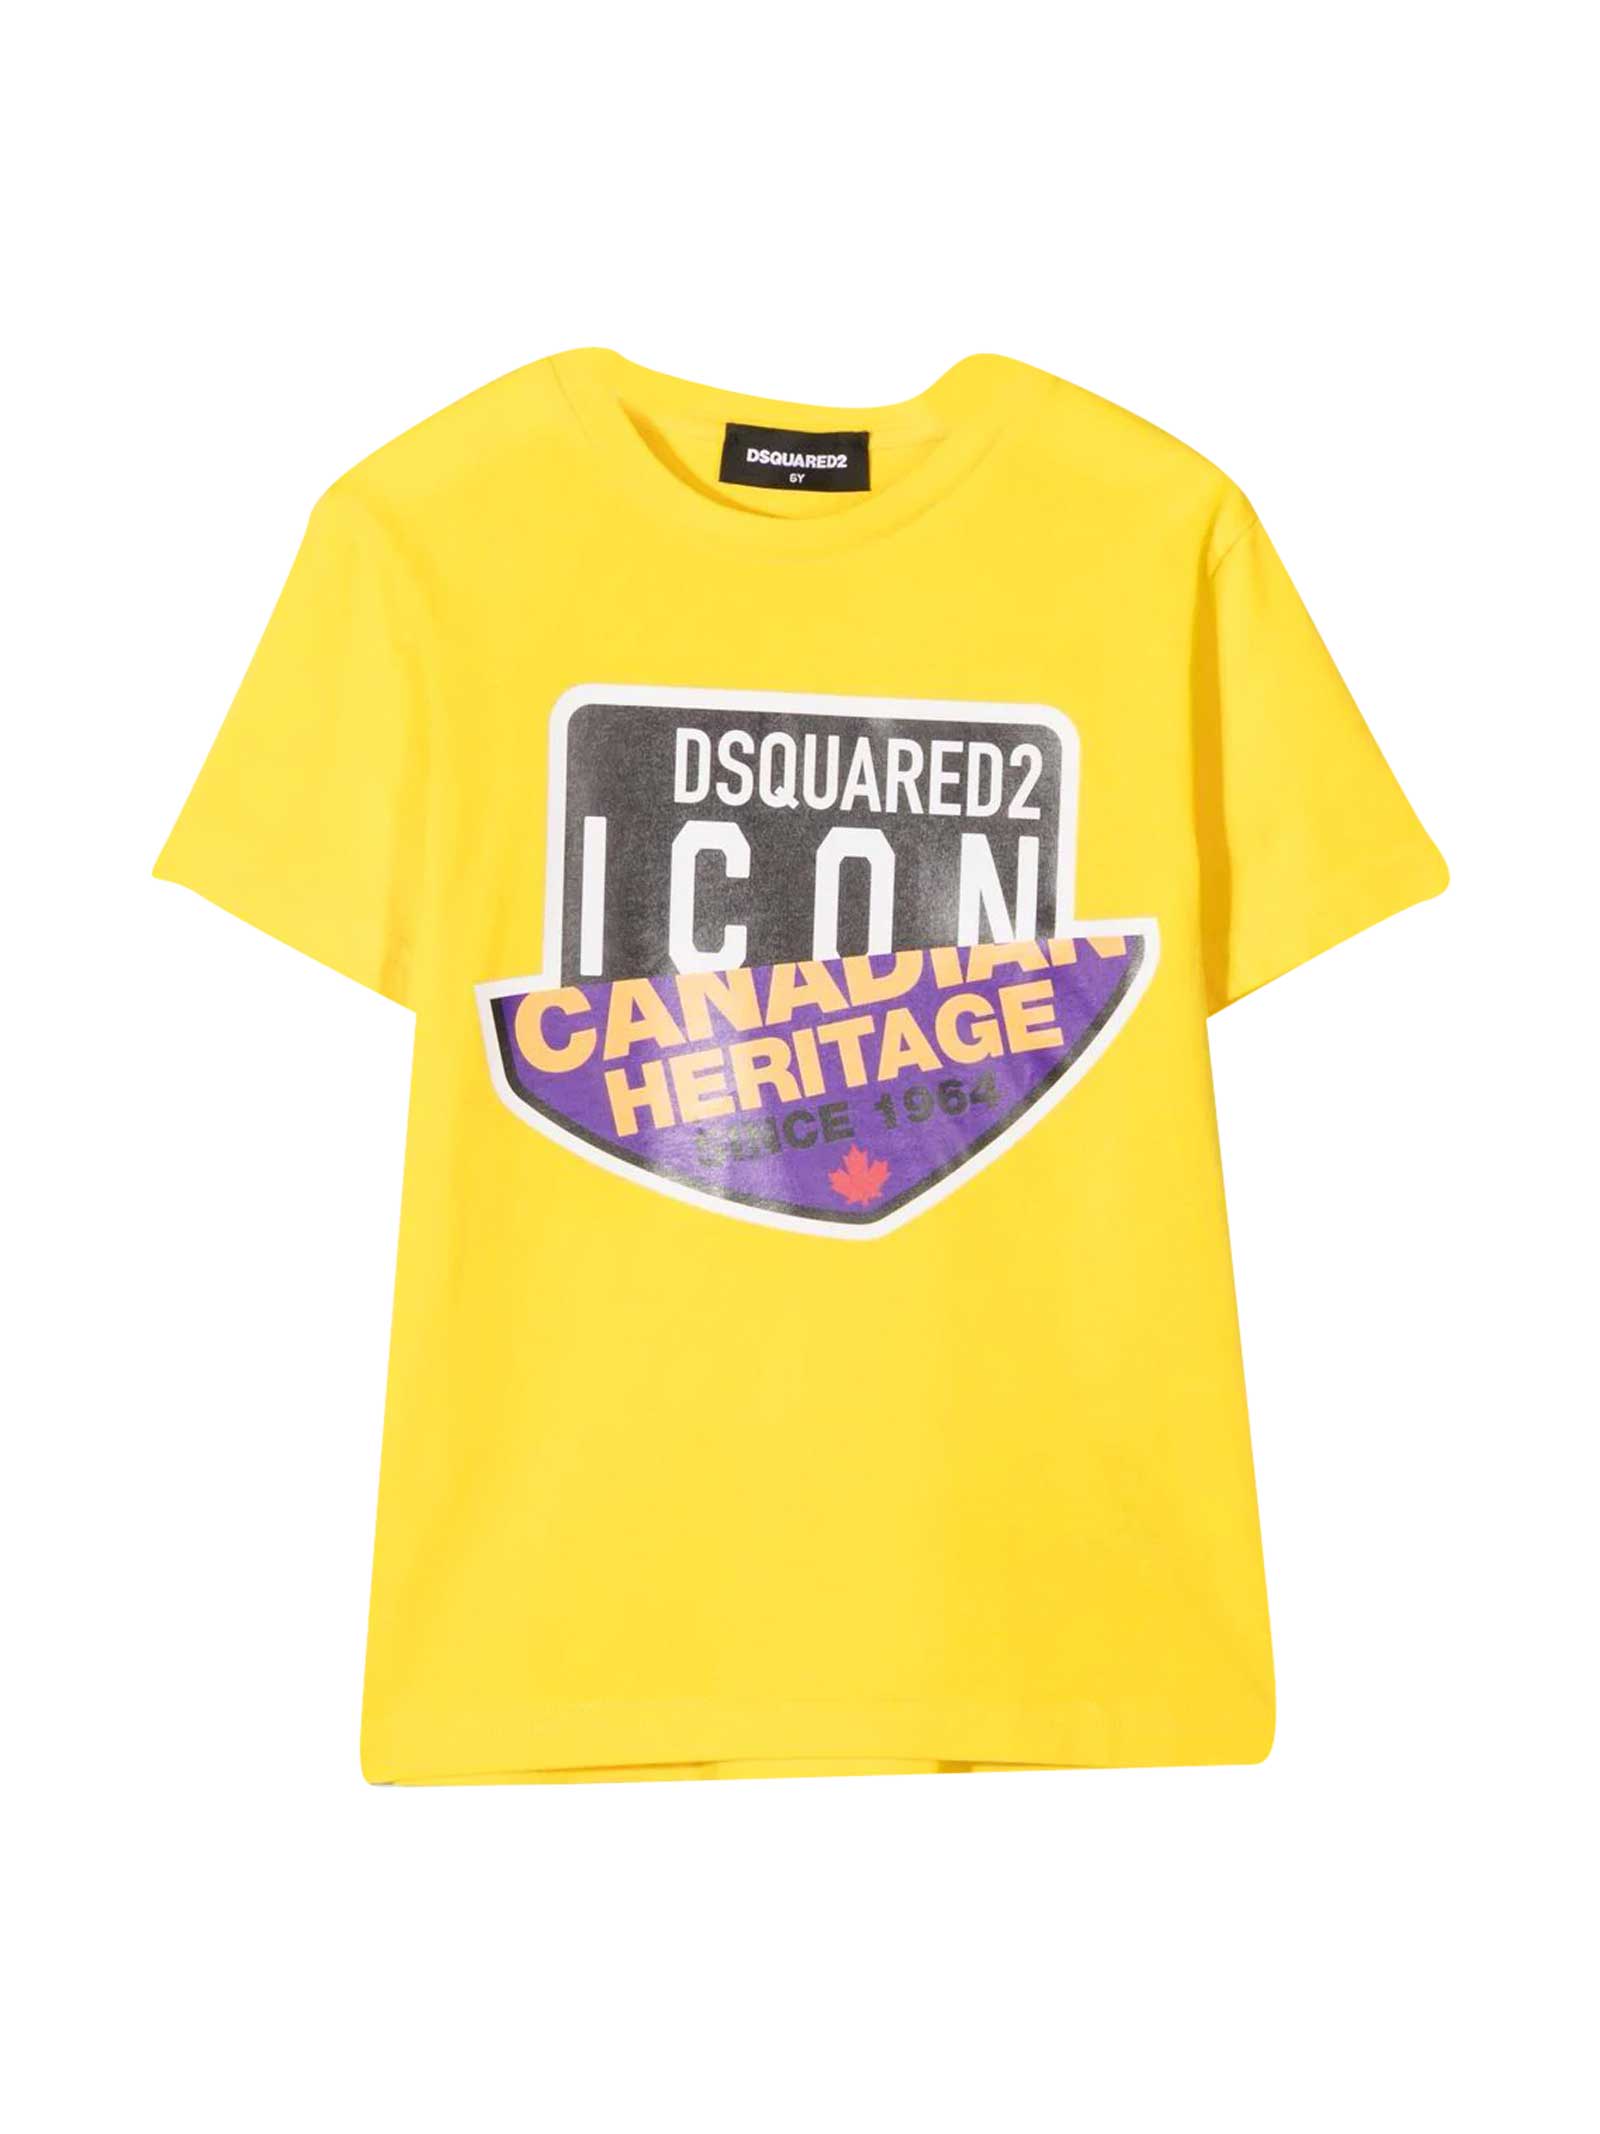 DSQUARED2 T-SHIRT WITH ICON LOGO,DQ0244D002F DQ214